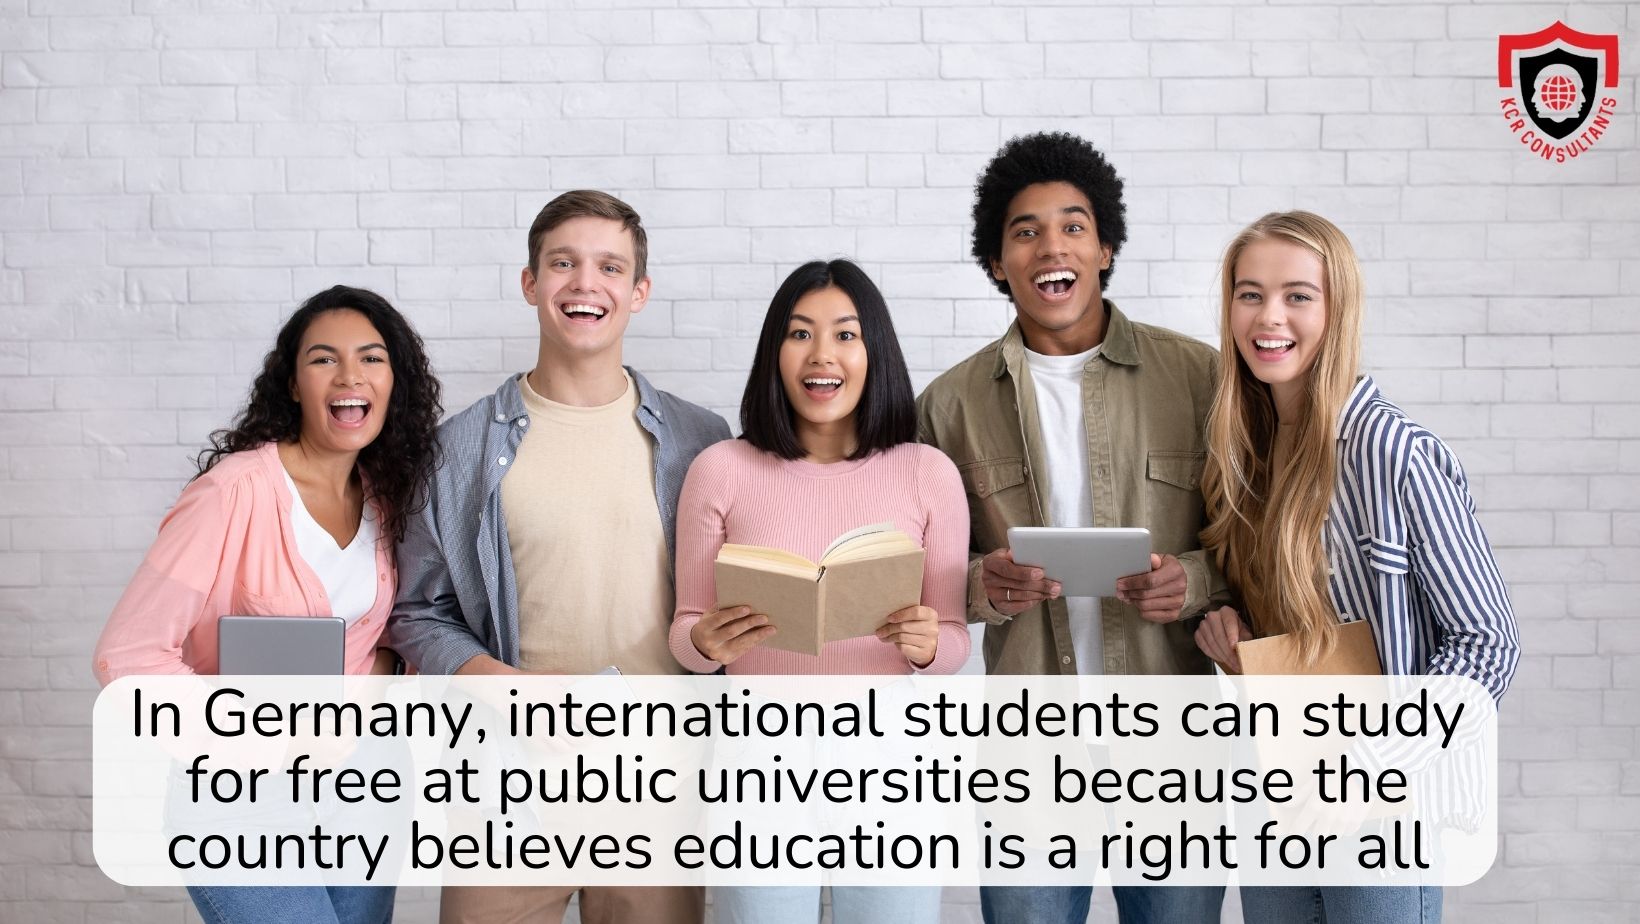 STUDY FREE IN GERMANY - KCR CONSULTANTS - Free education for international students